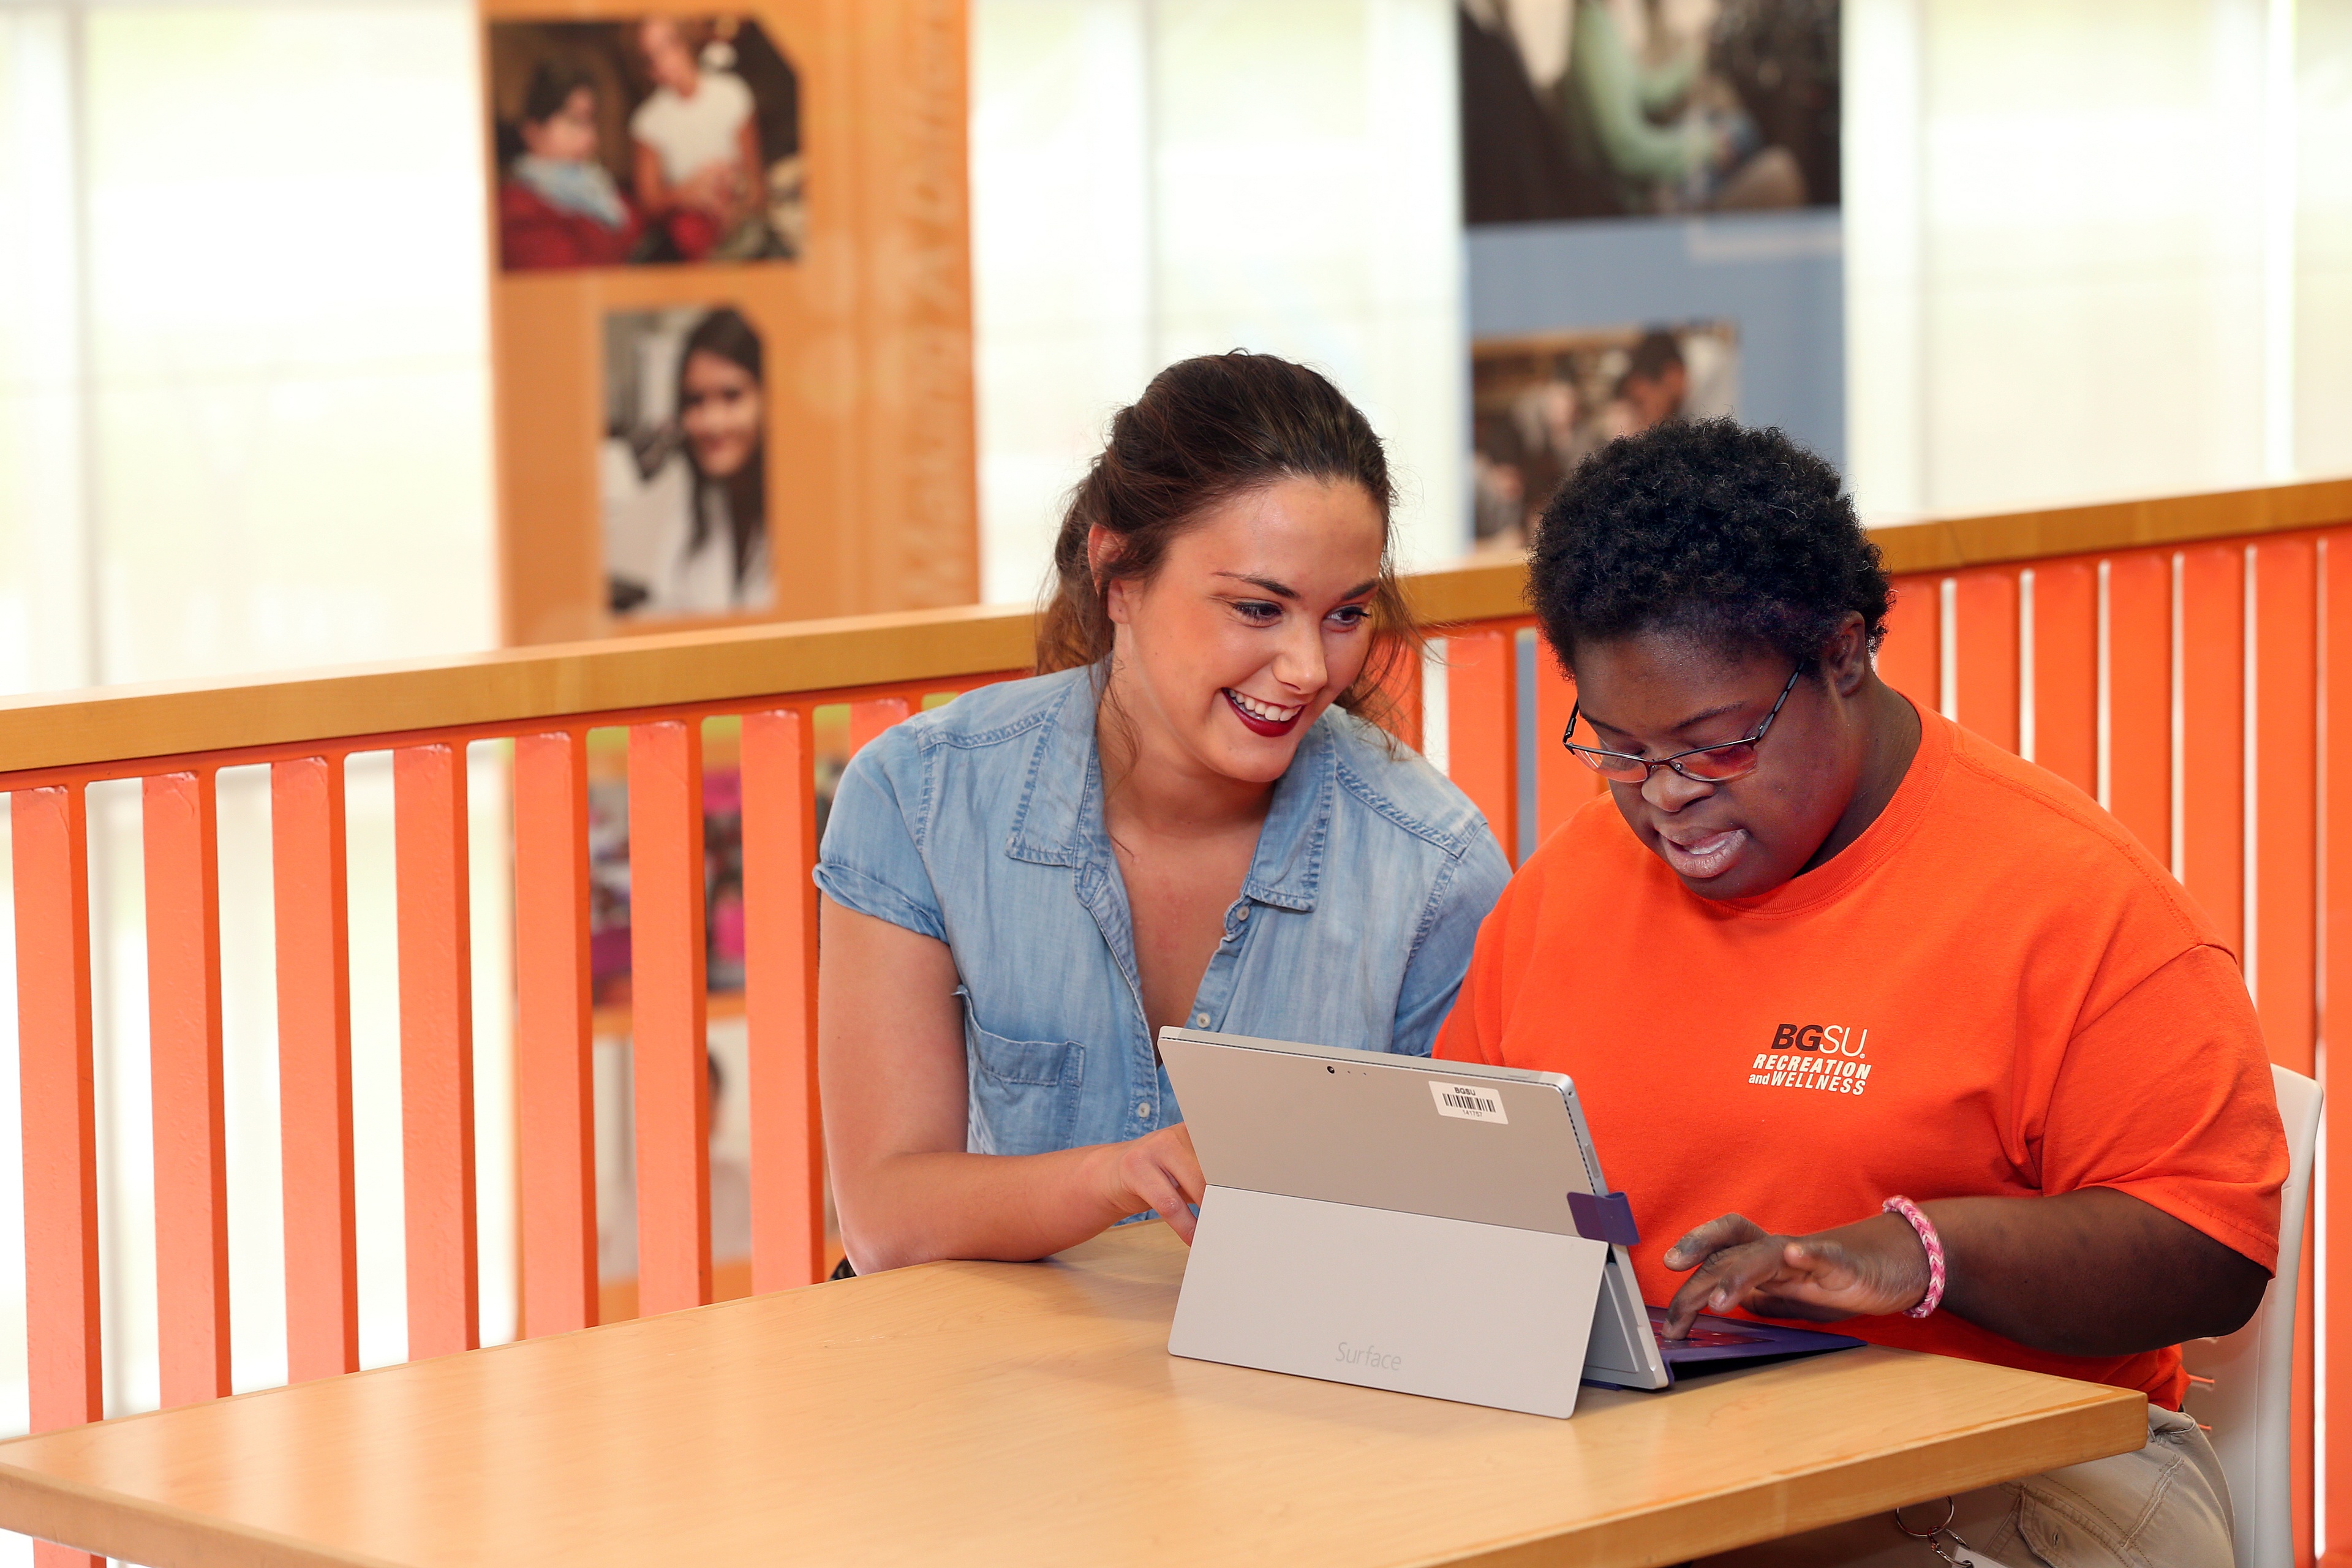 A female assistive technology master’s student helps a young woman with disabilities use a computer.